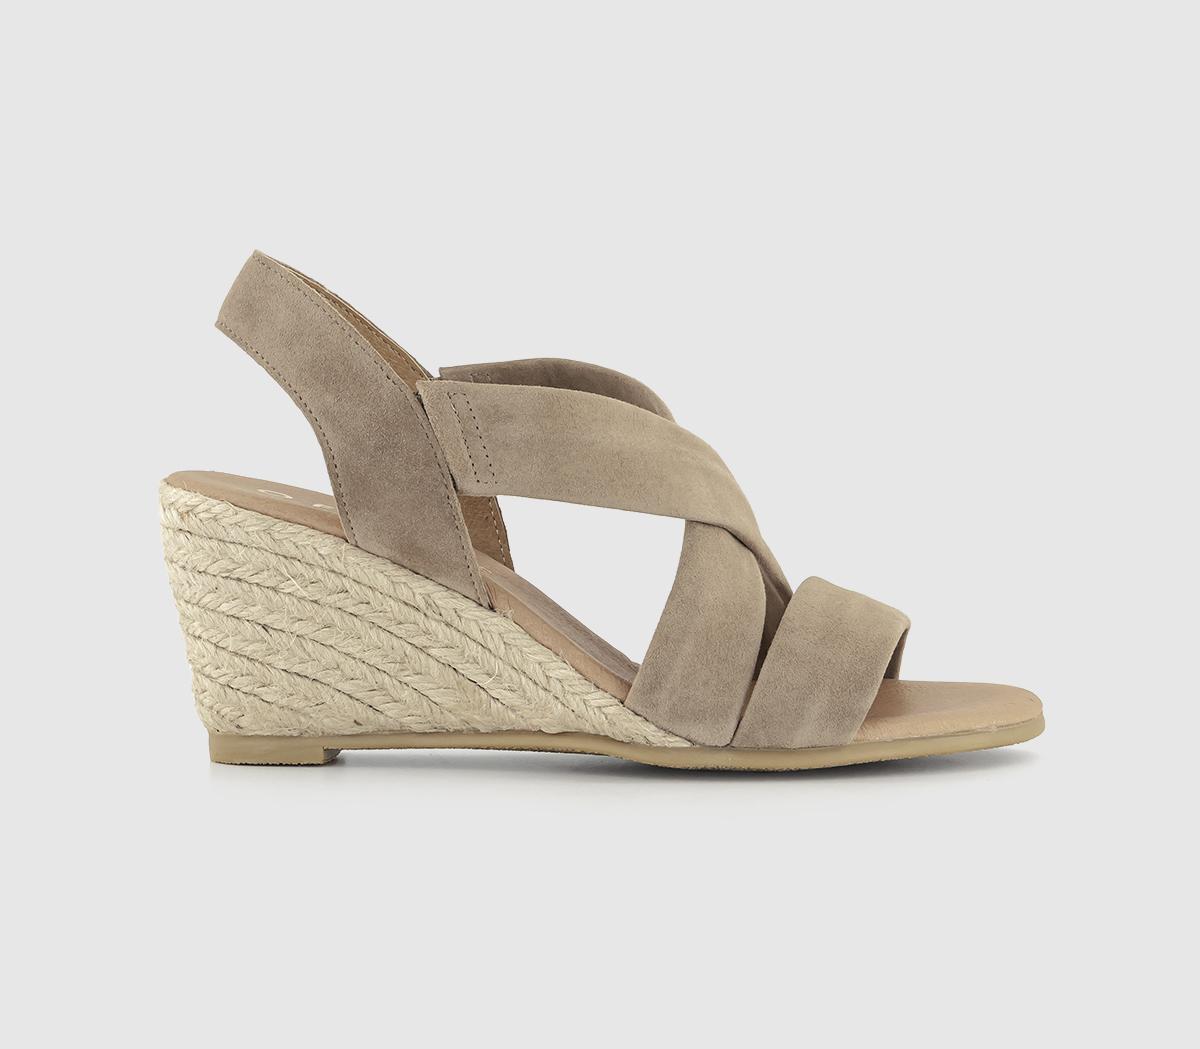 OFFICEMilly- Cross Strap Slingback Espadrille WedgeTaupe Suede